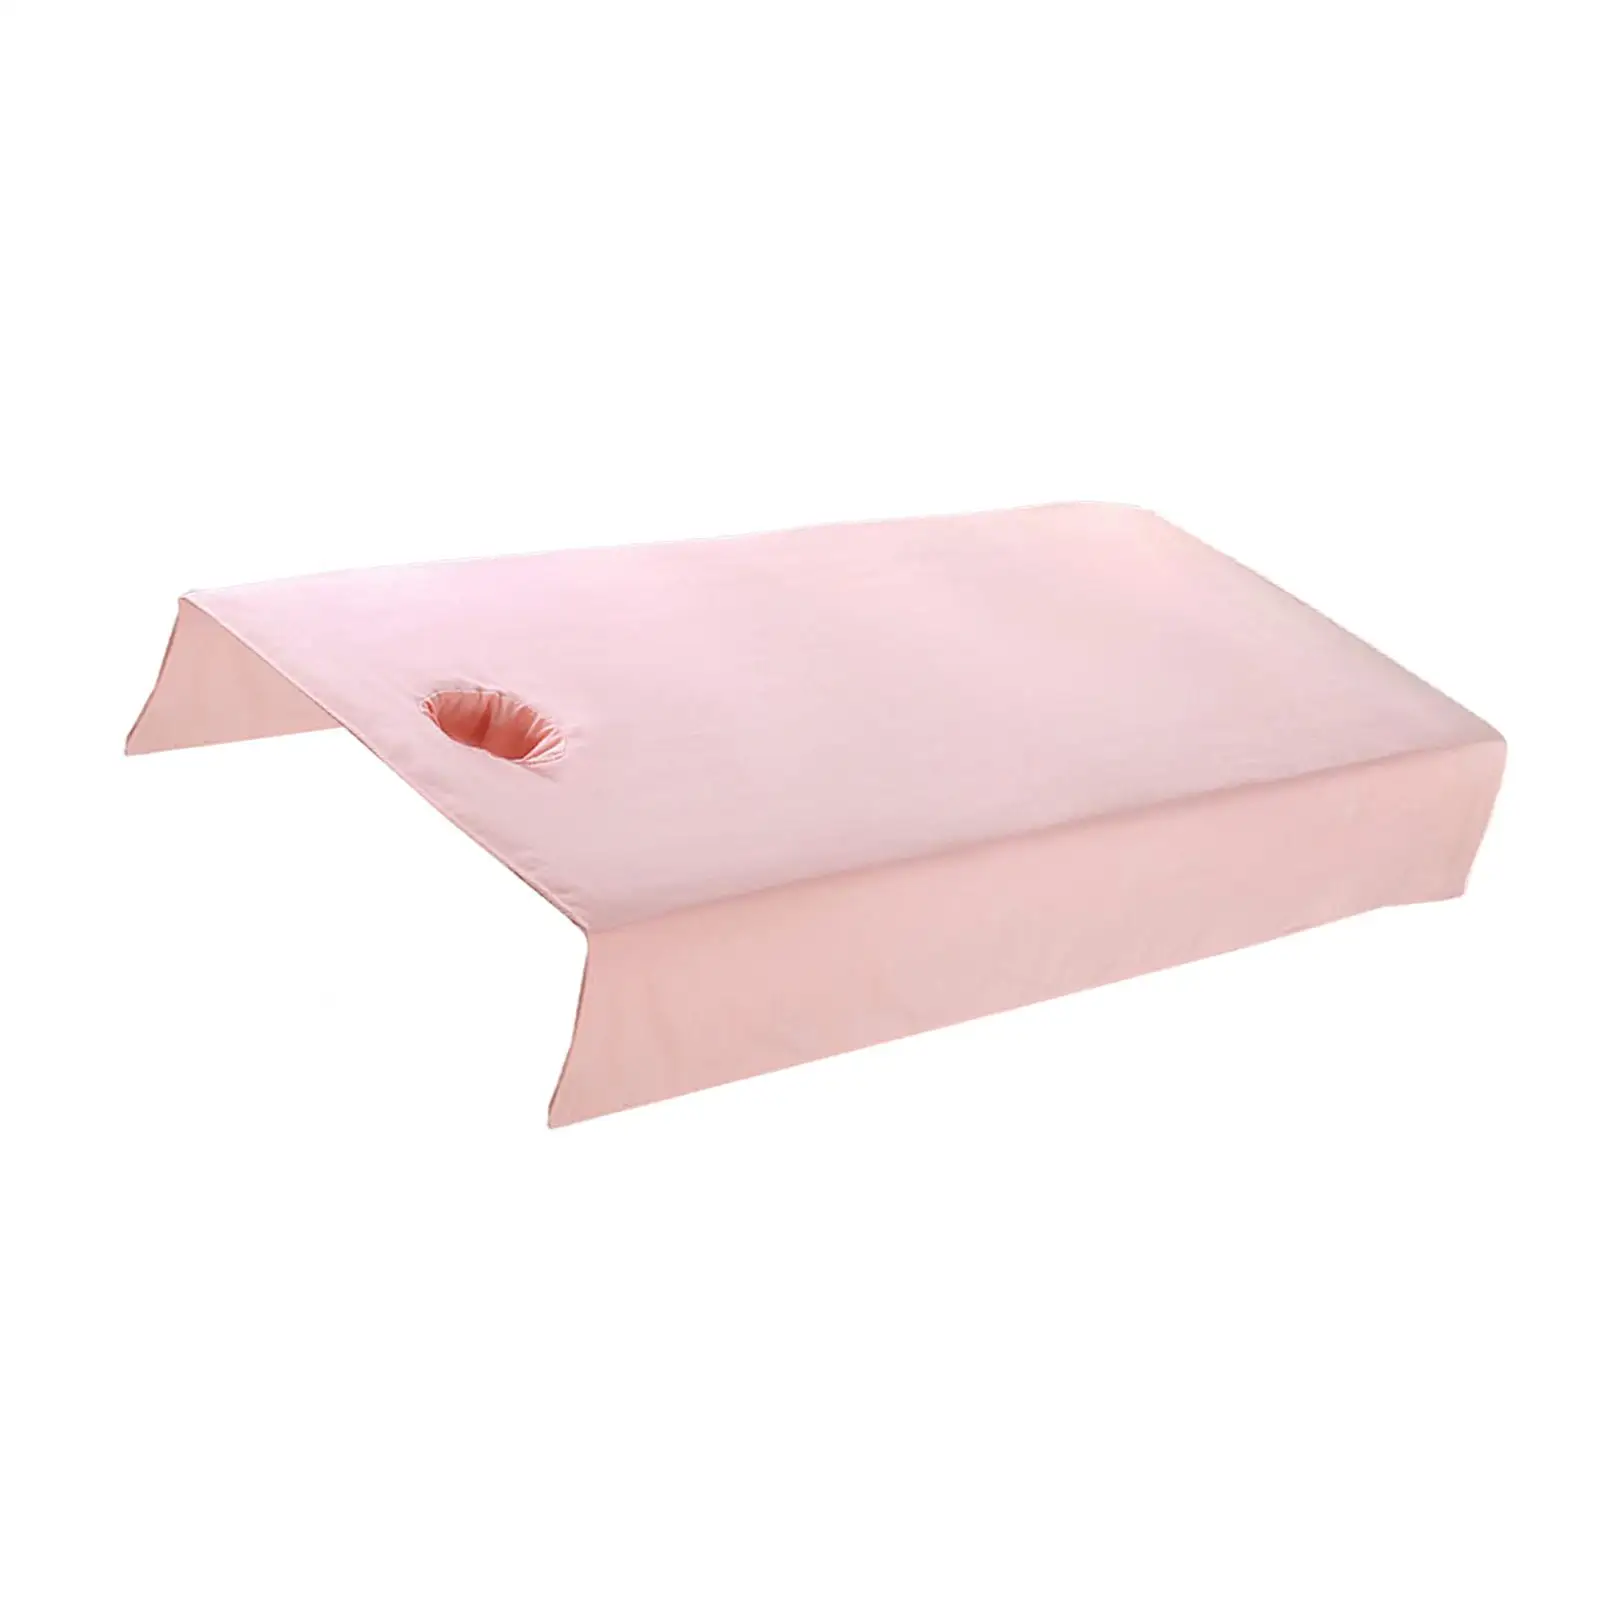 SPA Massage Bed Cover Sheet Protector with Face Hole 80x200cm Durable Elastic Accessories Anti Slip Soft Texture Polyester Wrap